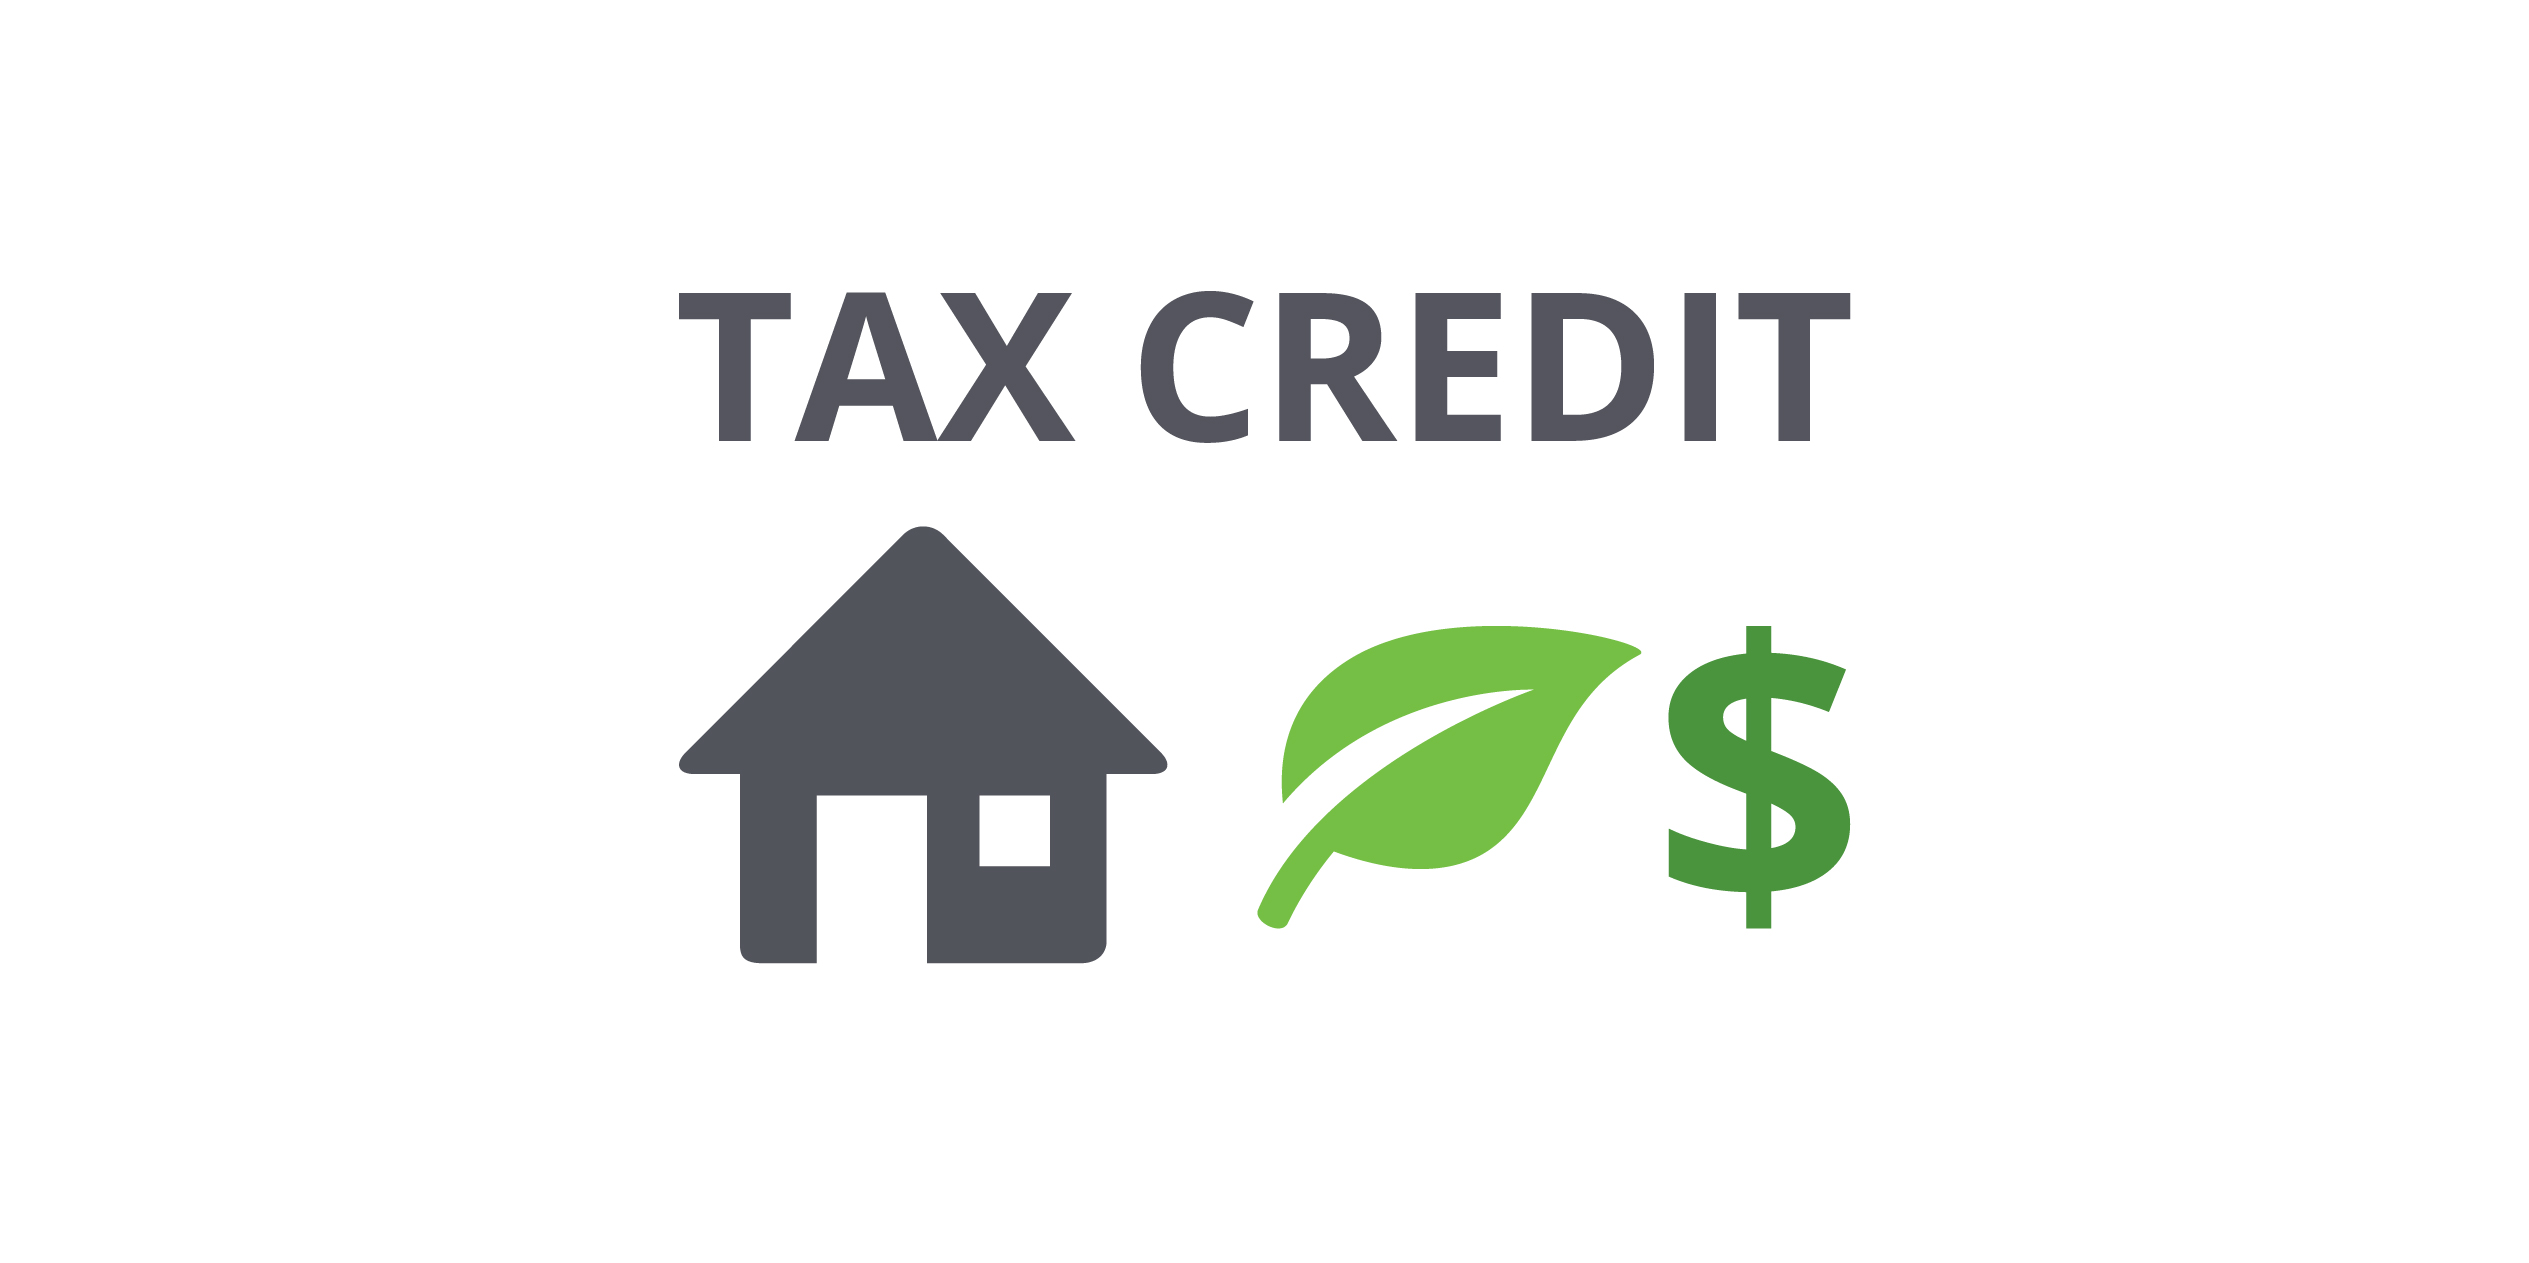 What determines eligibility for an energy tax credit?